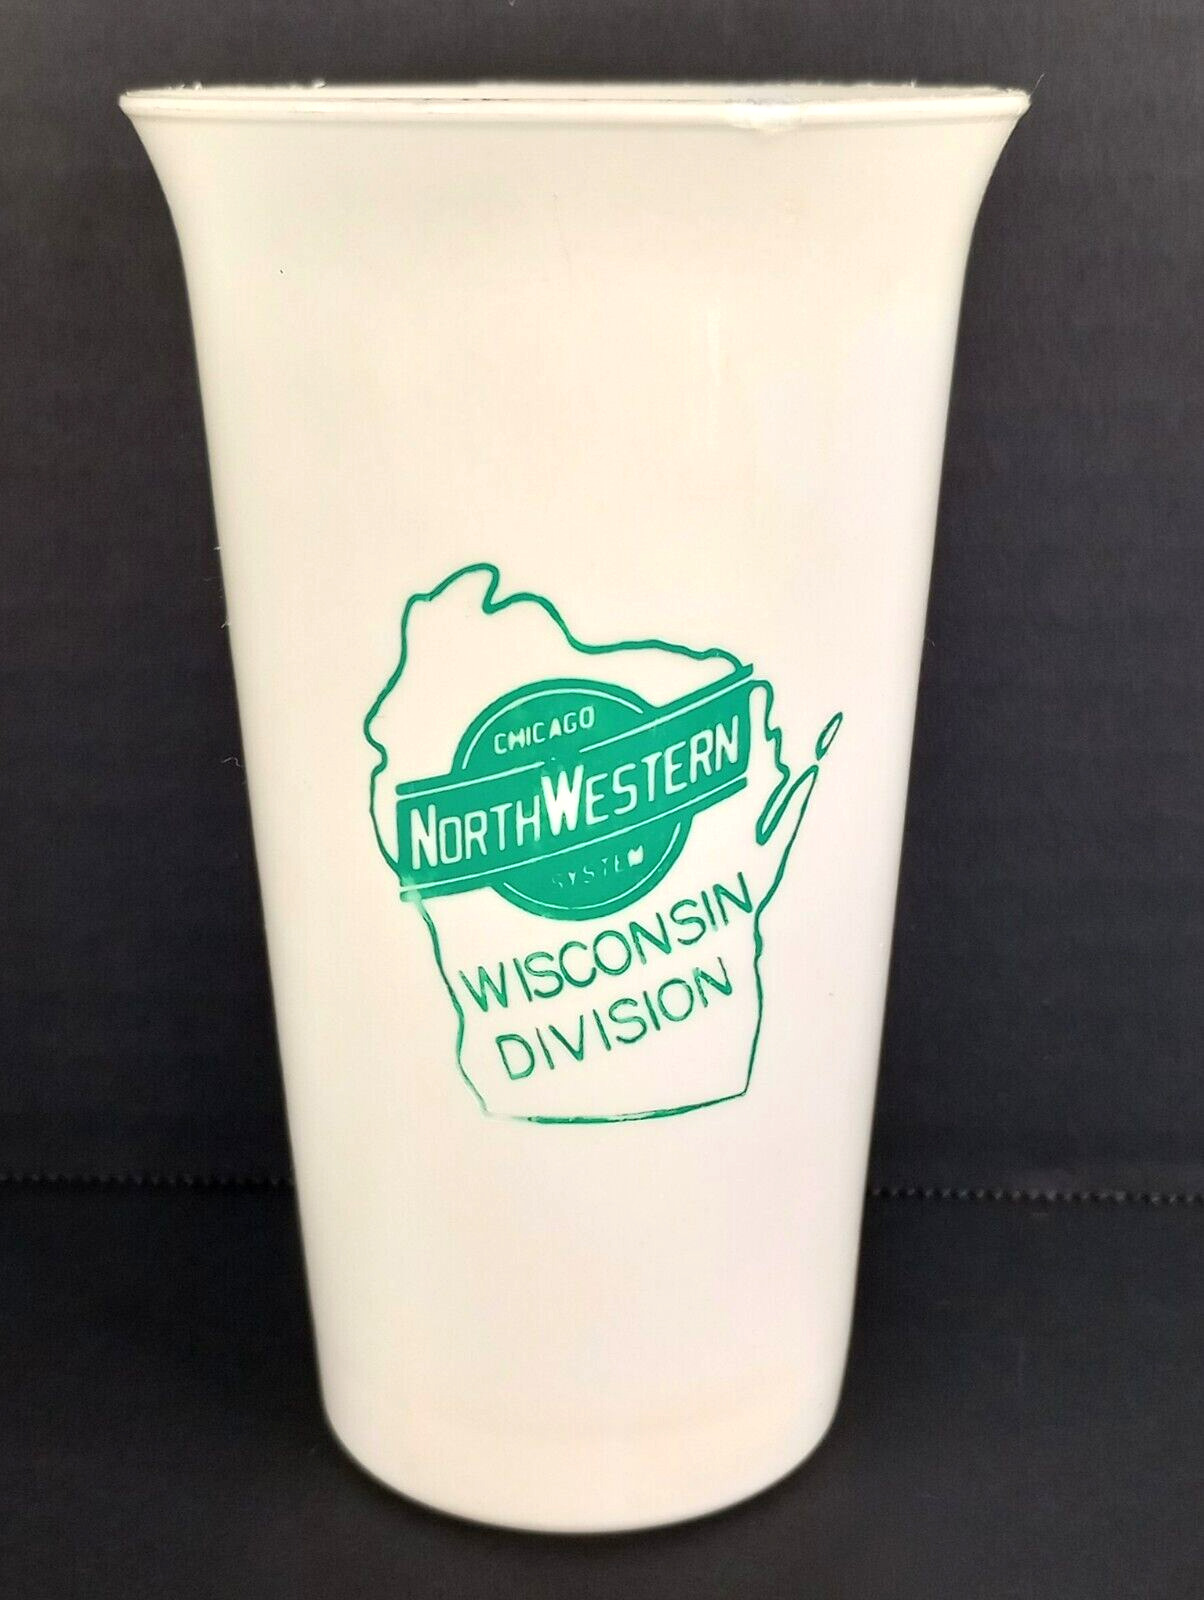 Vintage CHICAGO NORTHWESTERN SYSTEM WISCONSIN DIVISION PLASTIC CUP - railroad